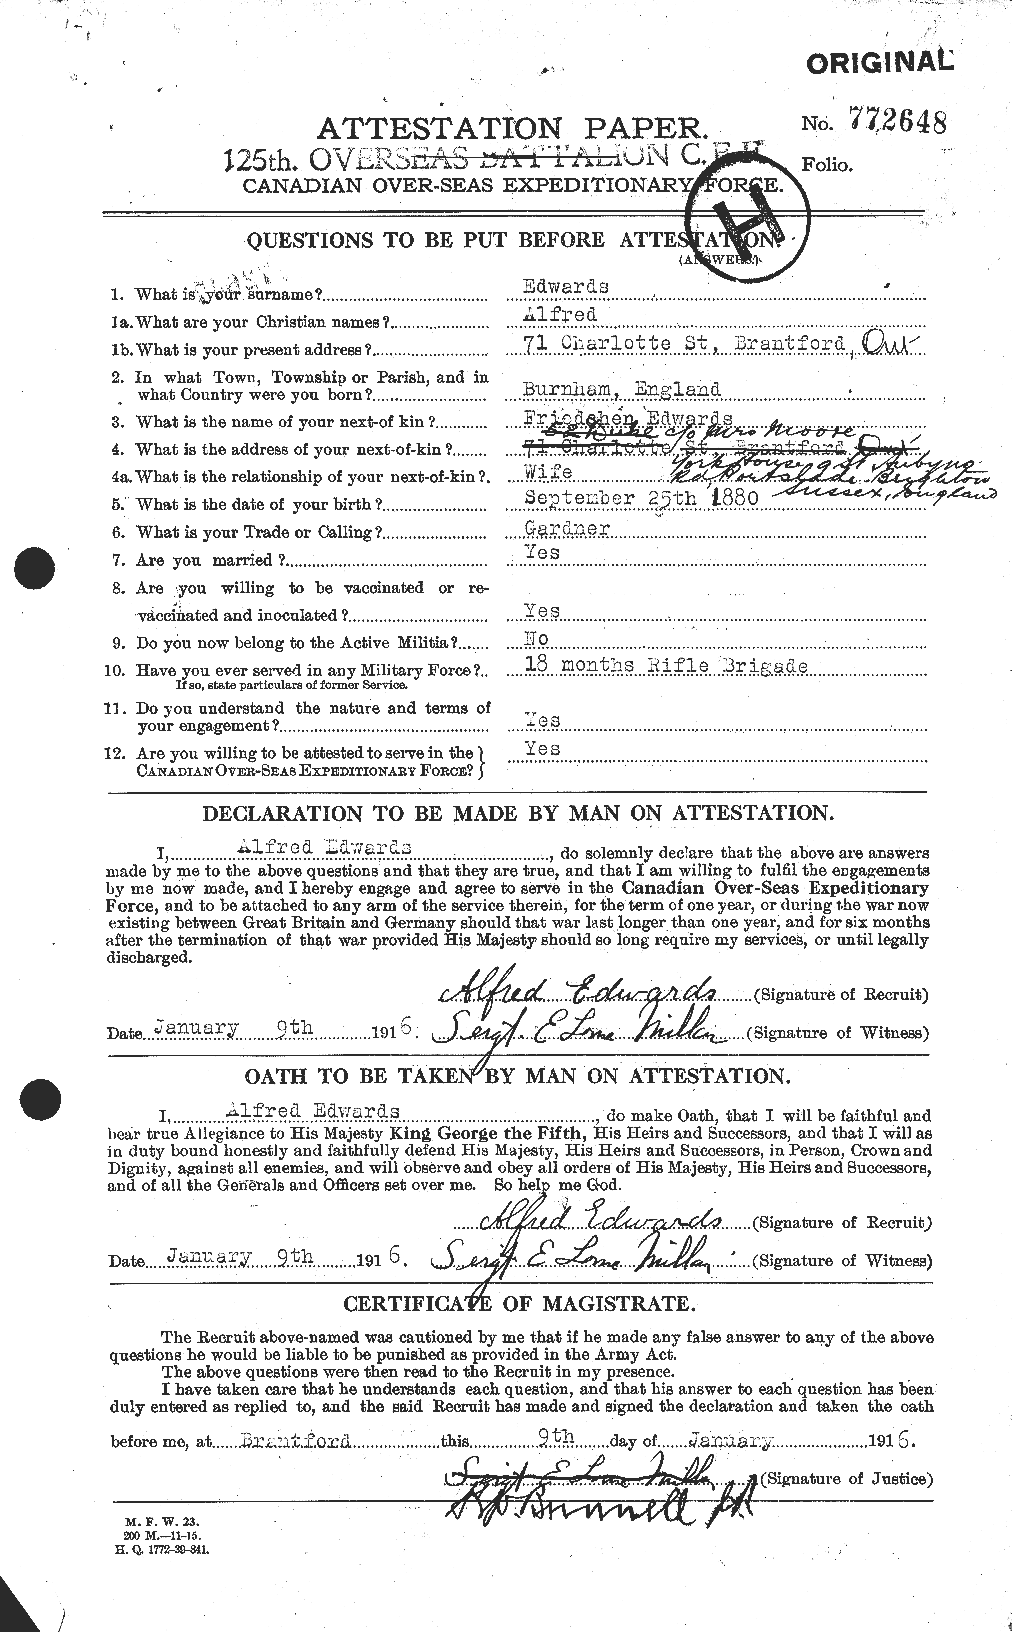 Personnel Records of the First World War - CEF 313101a